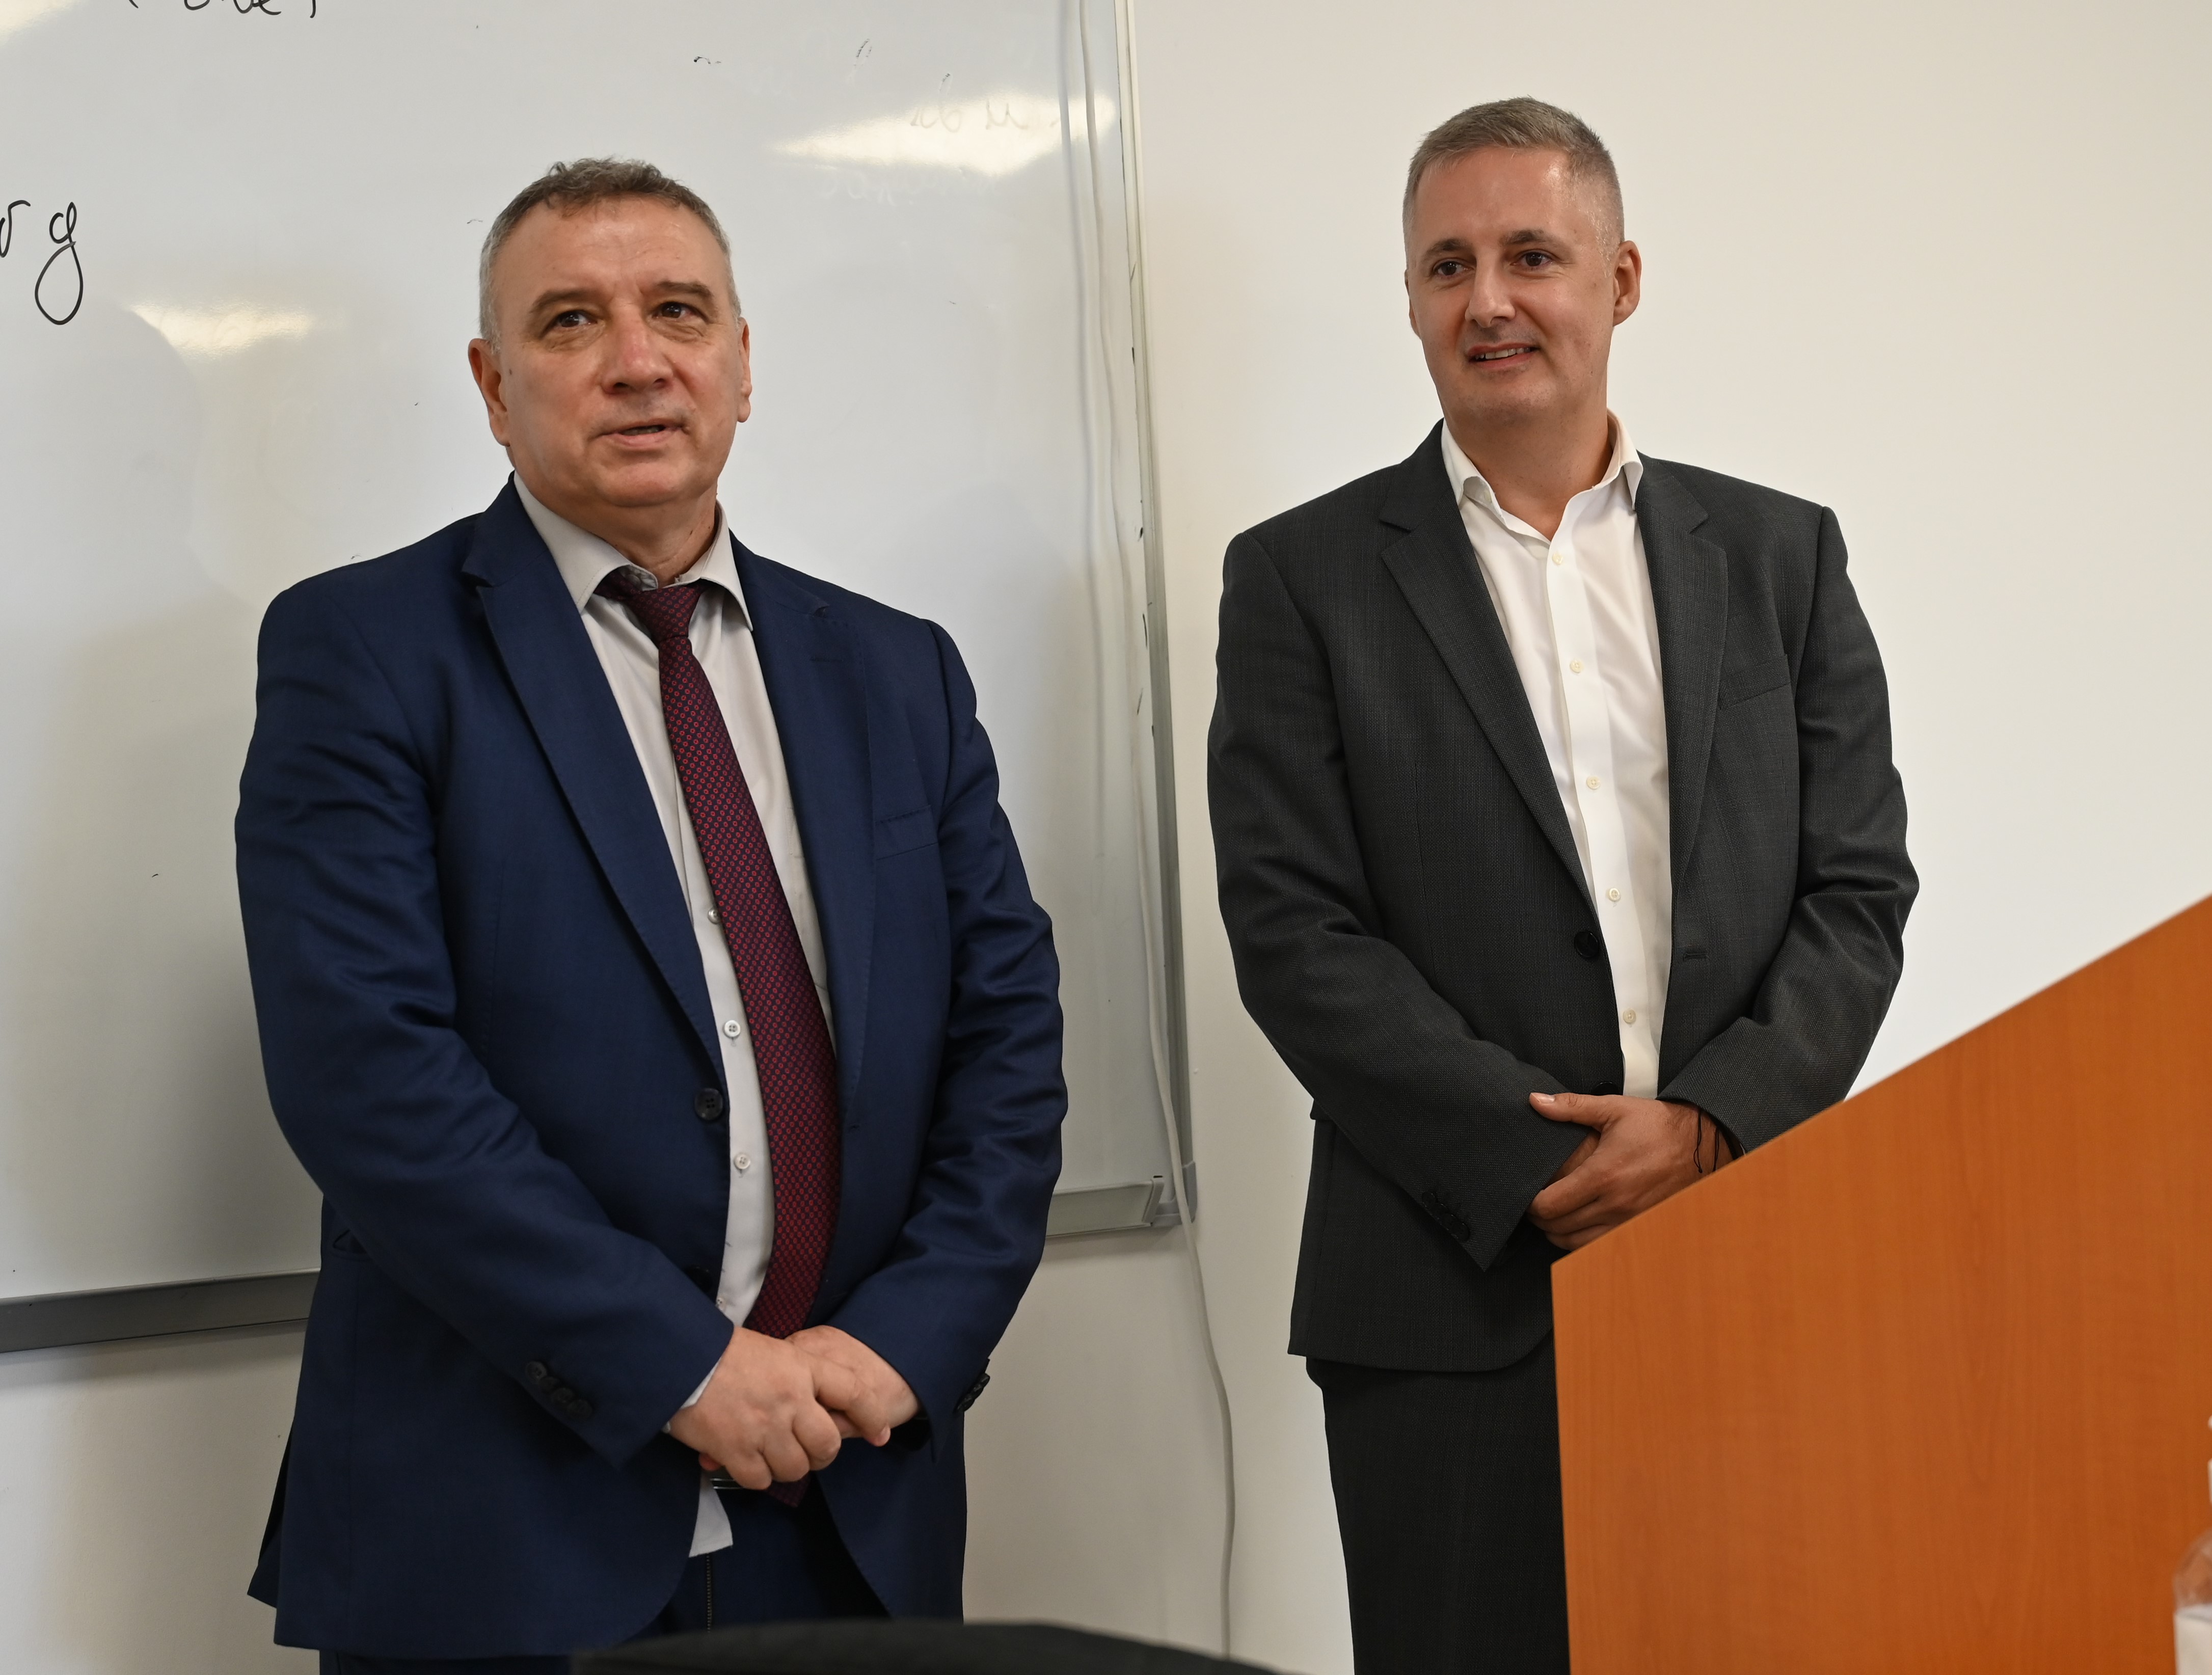 The Rector Prof. Dr. Dimitar Dimitrov introduced to first-year students of speciality Econimics of Defence and Security Mr. Kalin Dimchev, Executive Director of Microsoft Bulgaria and the countries in the Adriatic, part of the Southeast European region in the global structure of Microsoft. The Rector pointed out that the signing of a Memorandum of Cooperation between the company and the UNWE was discussed that it would be the first of its kind among the universities in Bulgaria. Prof. Dimitar Dimitrov pointed out that the Memorandum will be part of the introduced practice for business academies. And he outlined that many new opportunities open up for students.